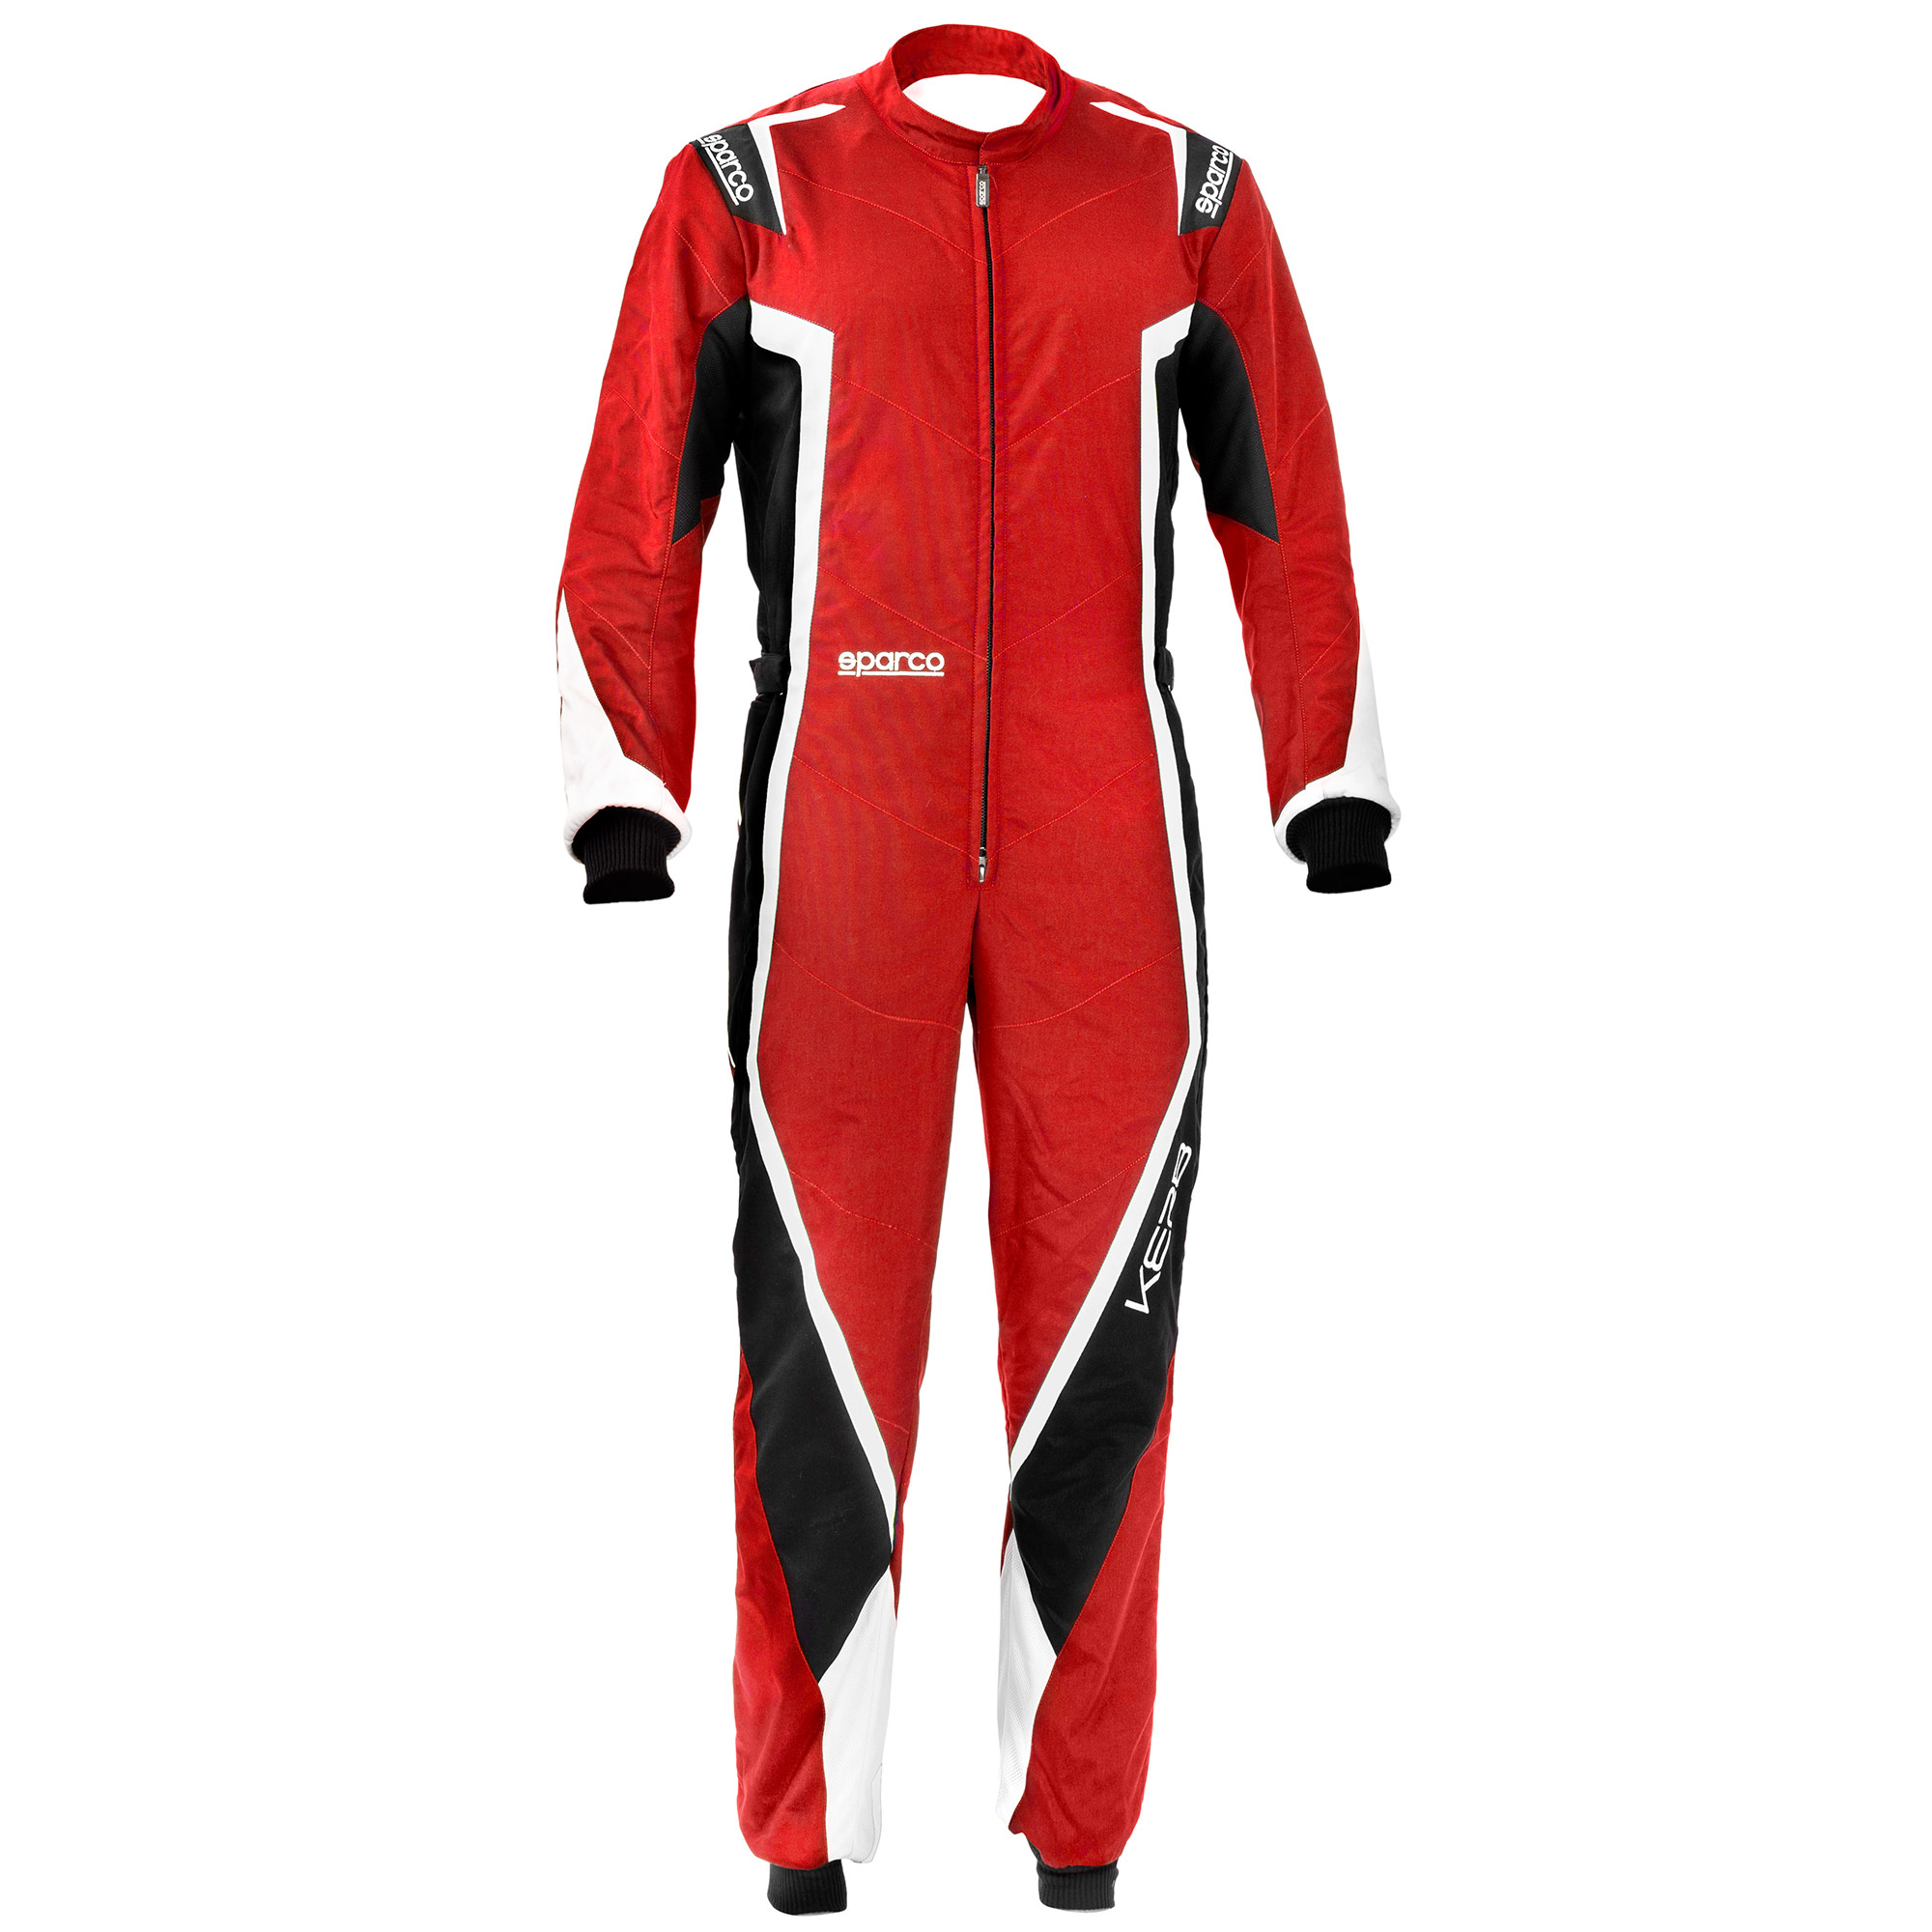 Sparco Kerb Karting 2 Layer Suit, CIK FIA Level 2 Approved - Children's ...